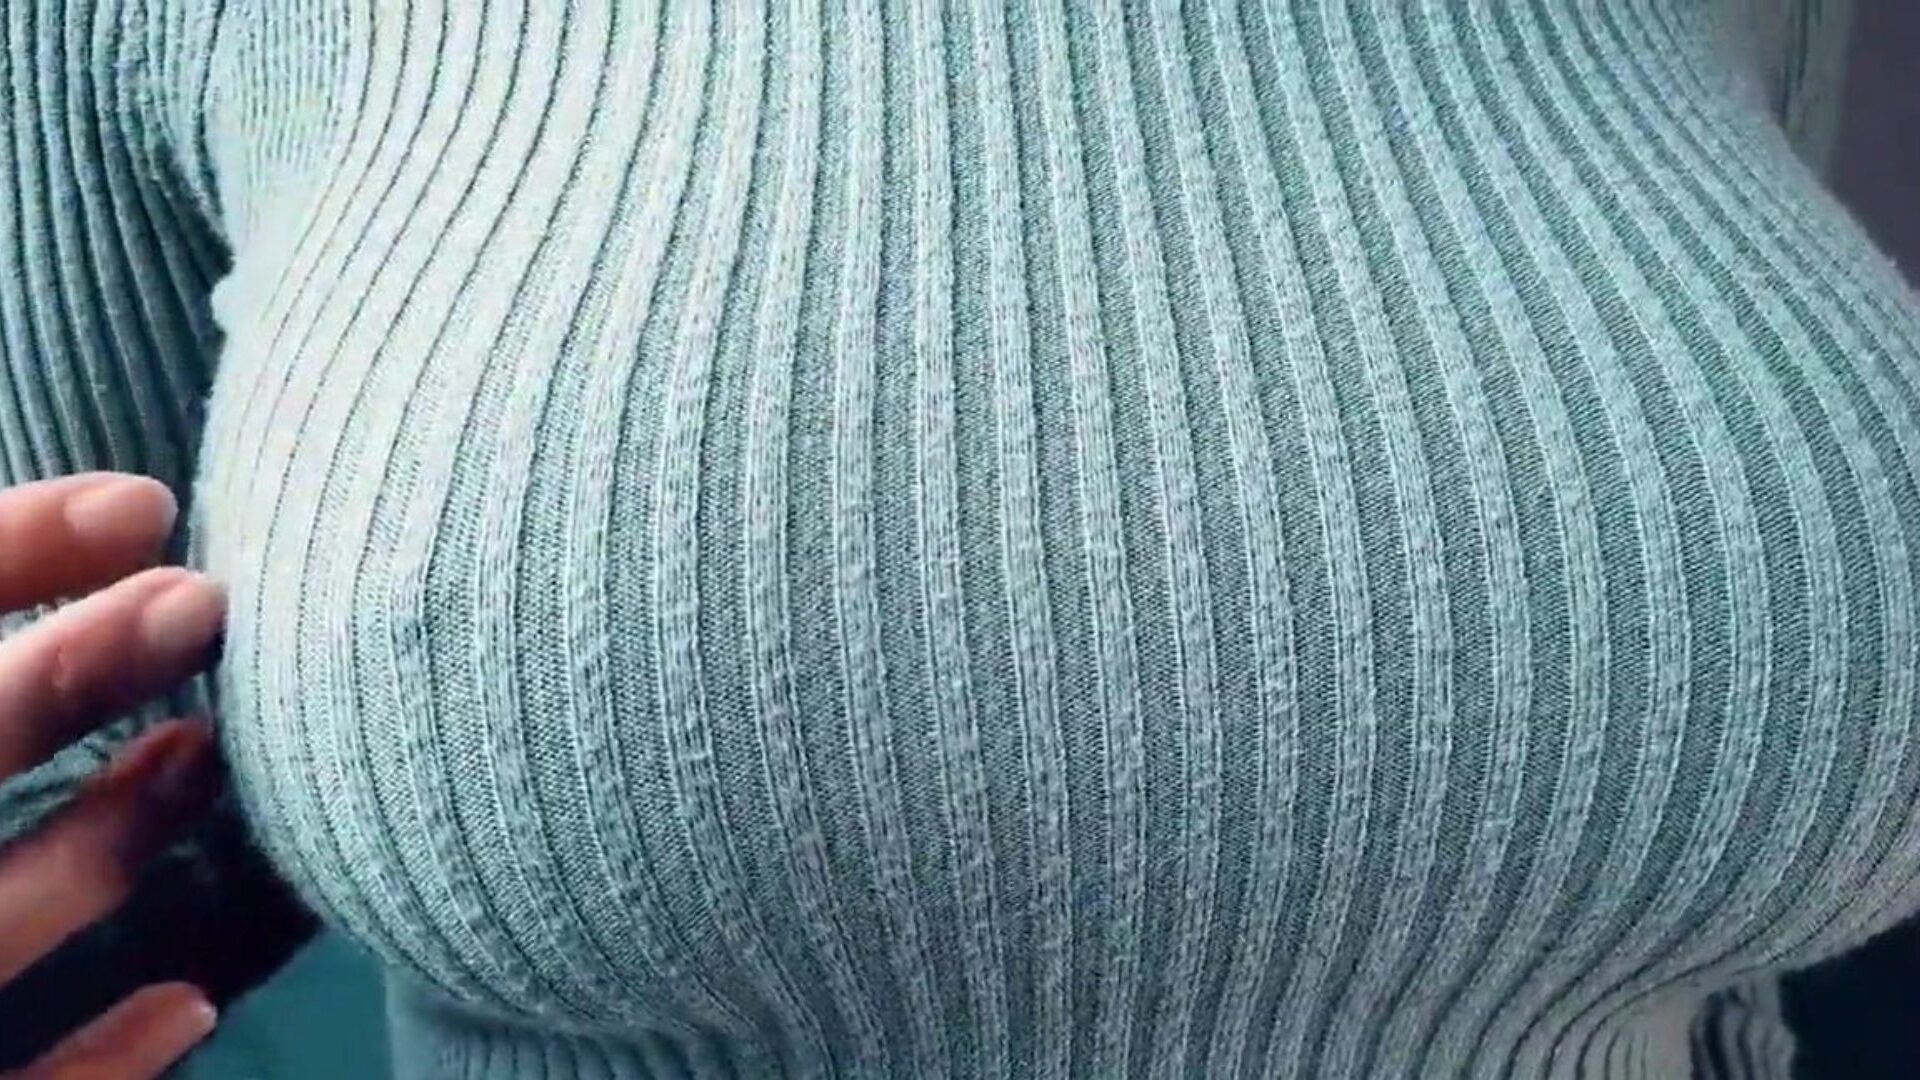 Big Tits Playing Teasing in a Tight Knitted Sweater... Watch Big Tits Playing Teasing in a Tight Knitted Sweater episode on xHamster - the ultimate selection of free 60 FPS & Knitting HD porno tube episodes